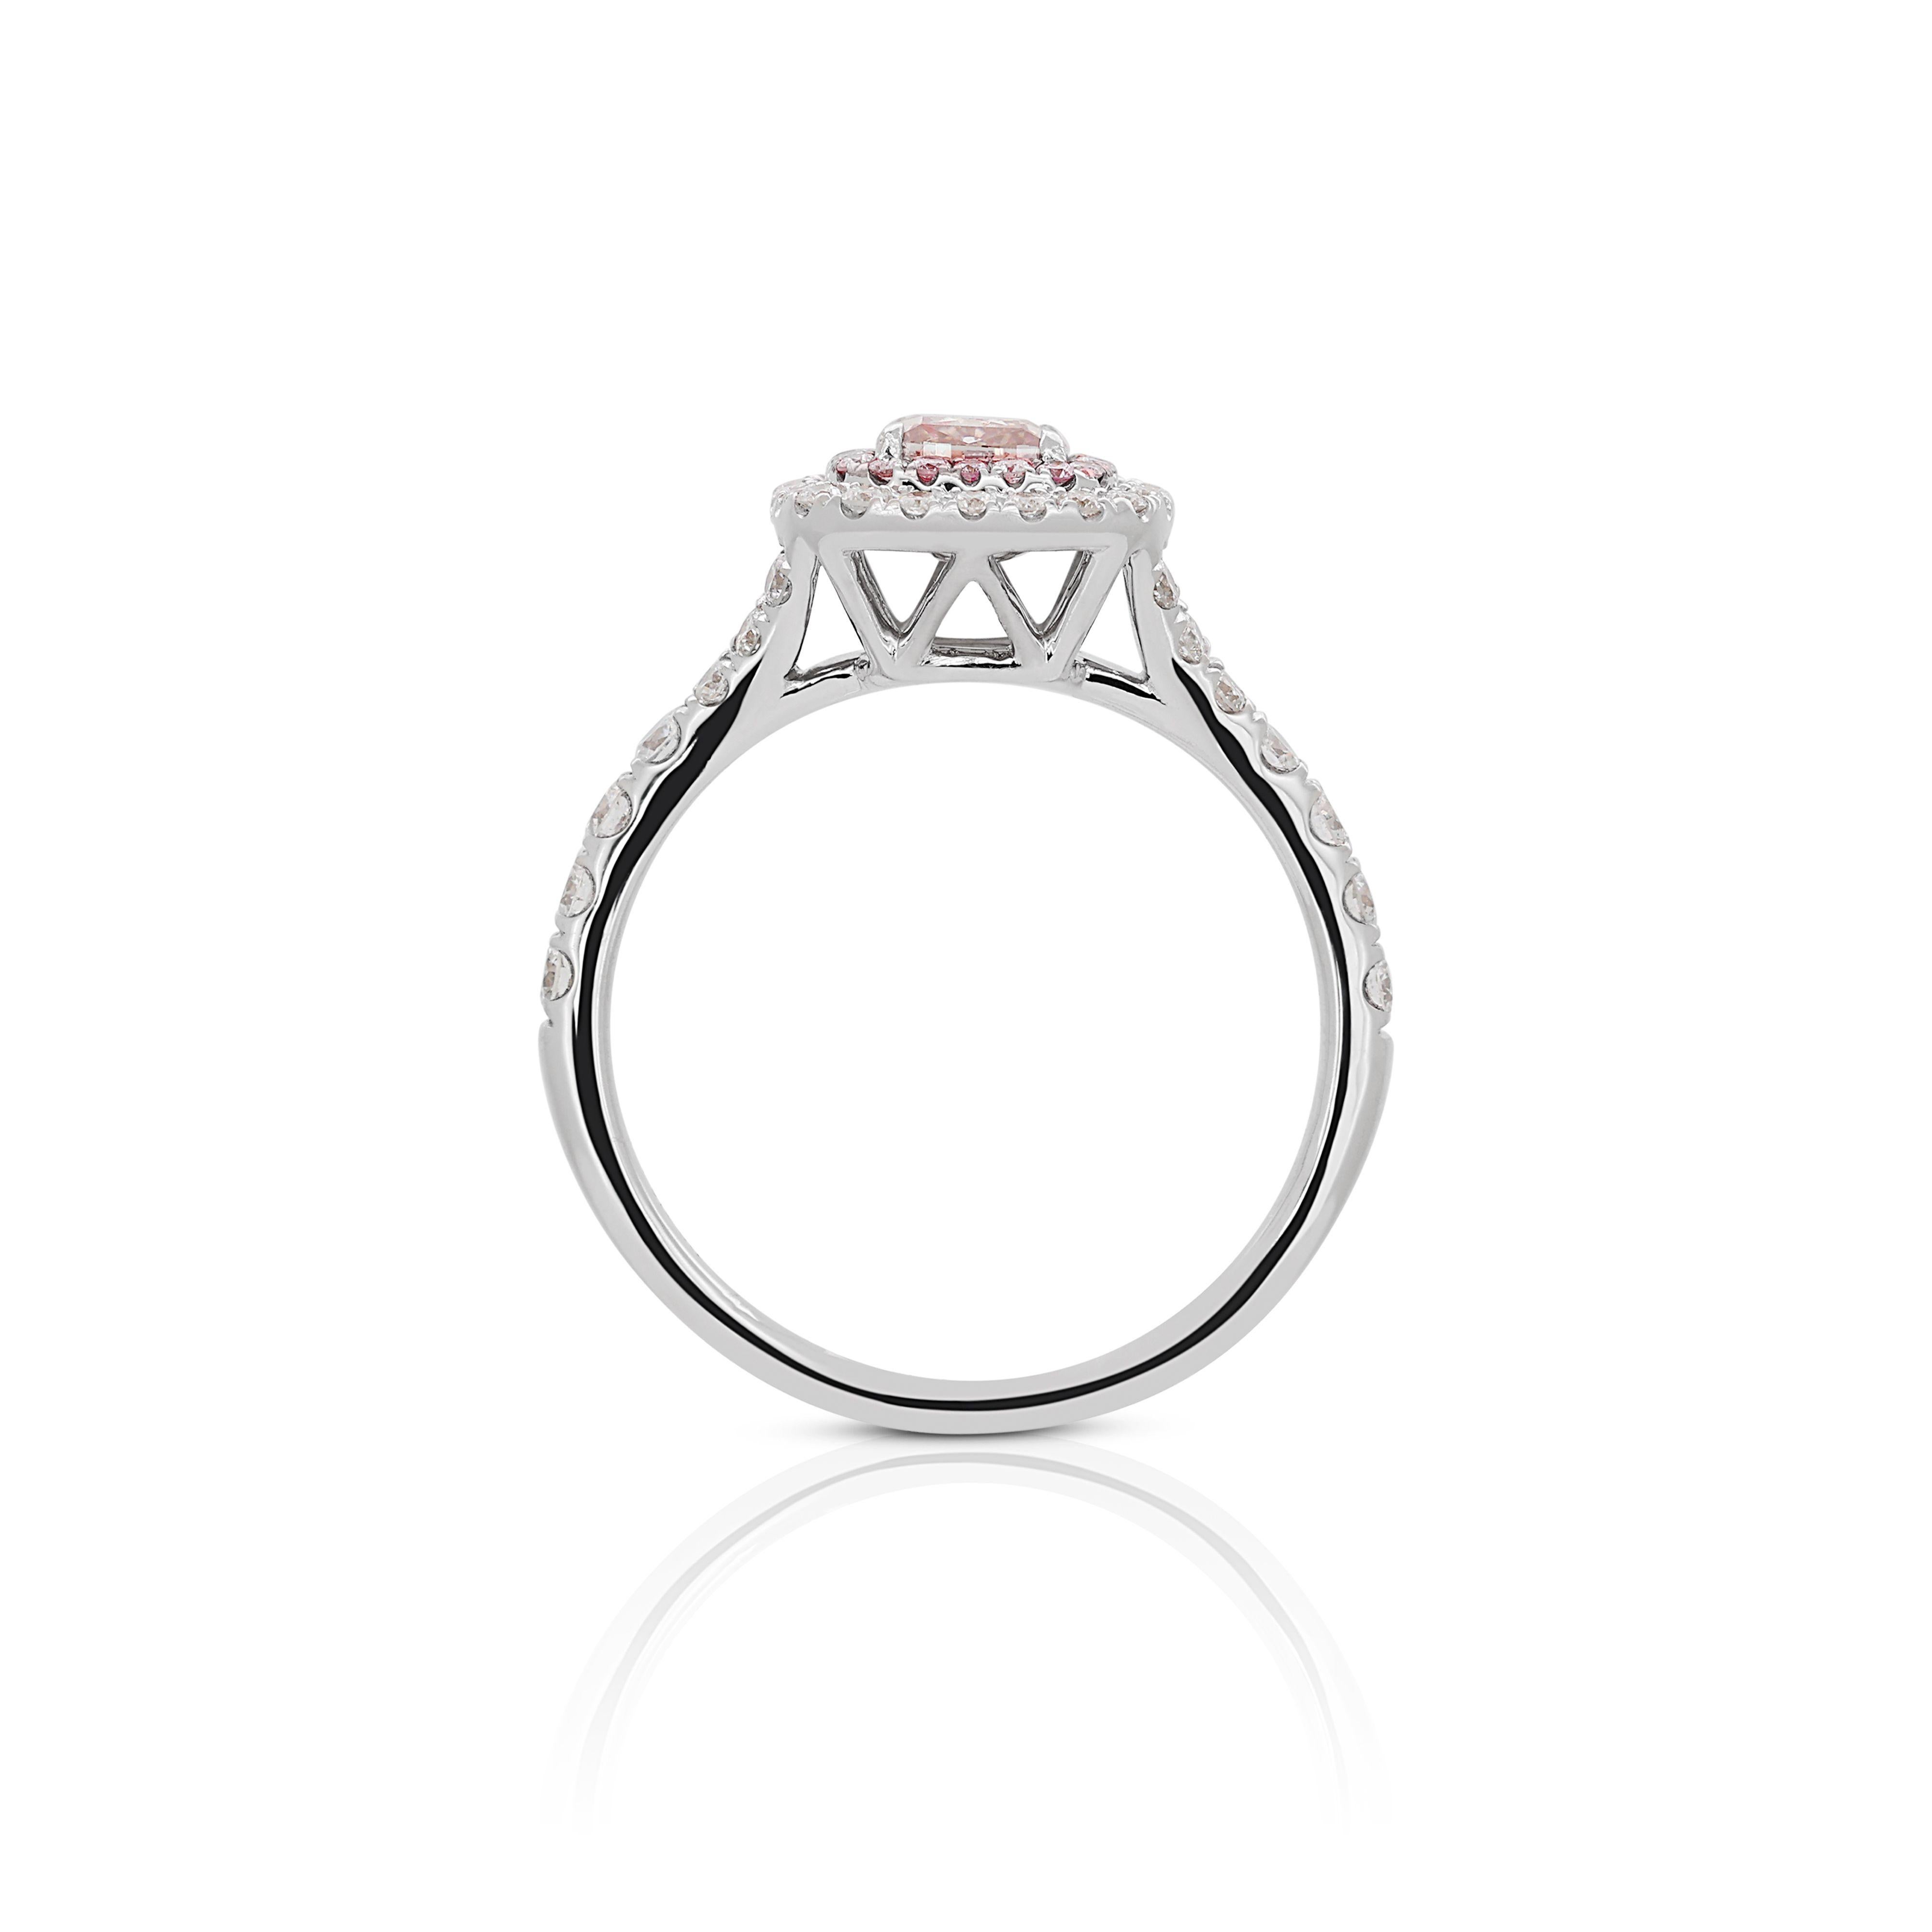 Women's Exquisite 0.79ct Diamond Halo Ring in 18K White Gold For Sale